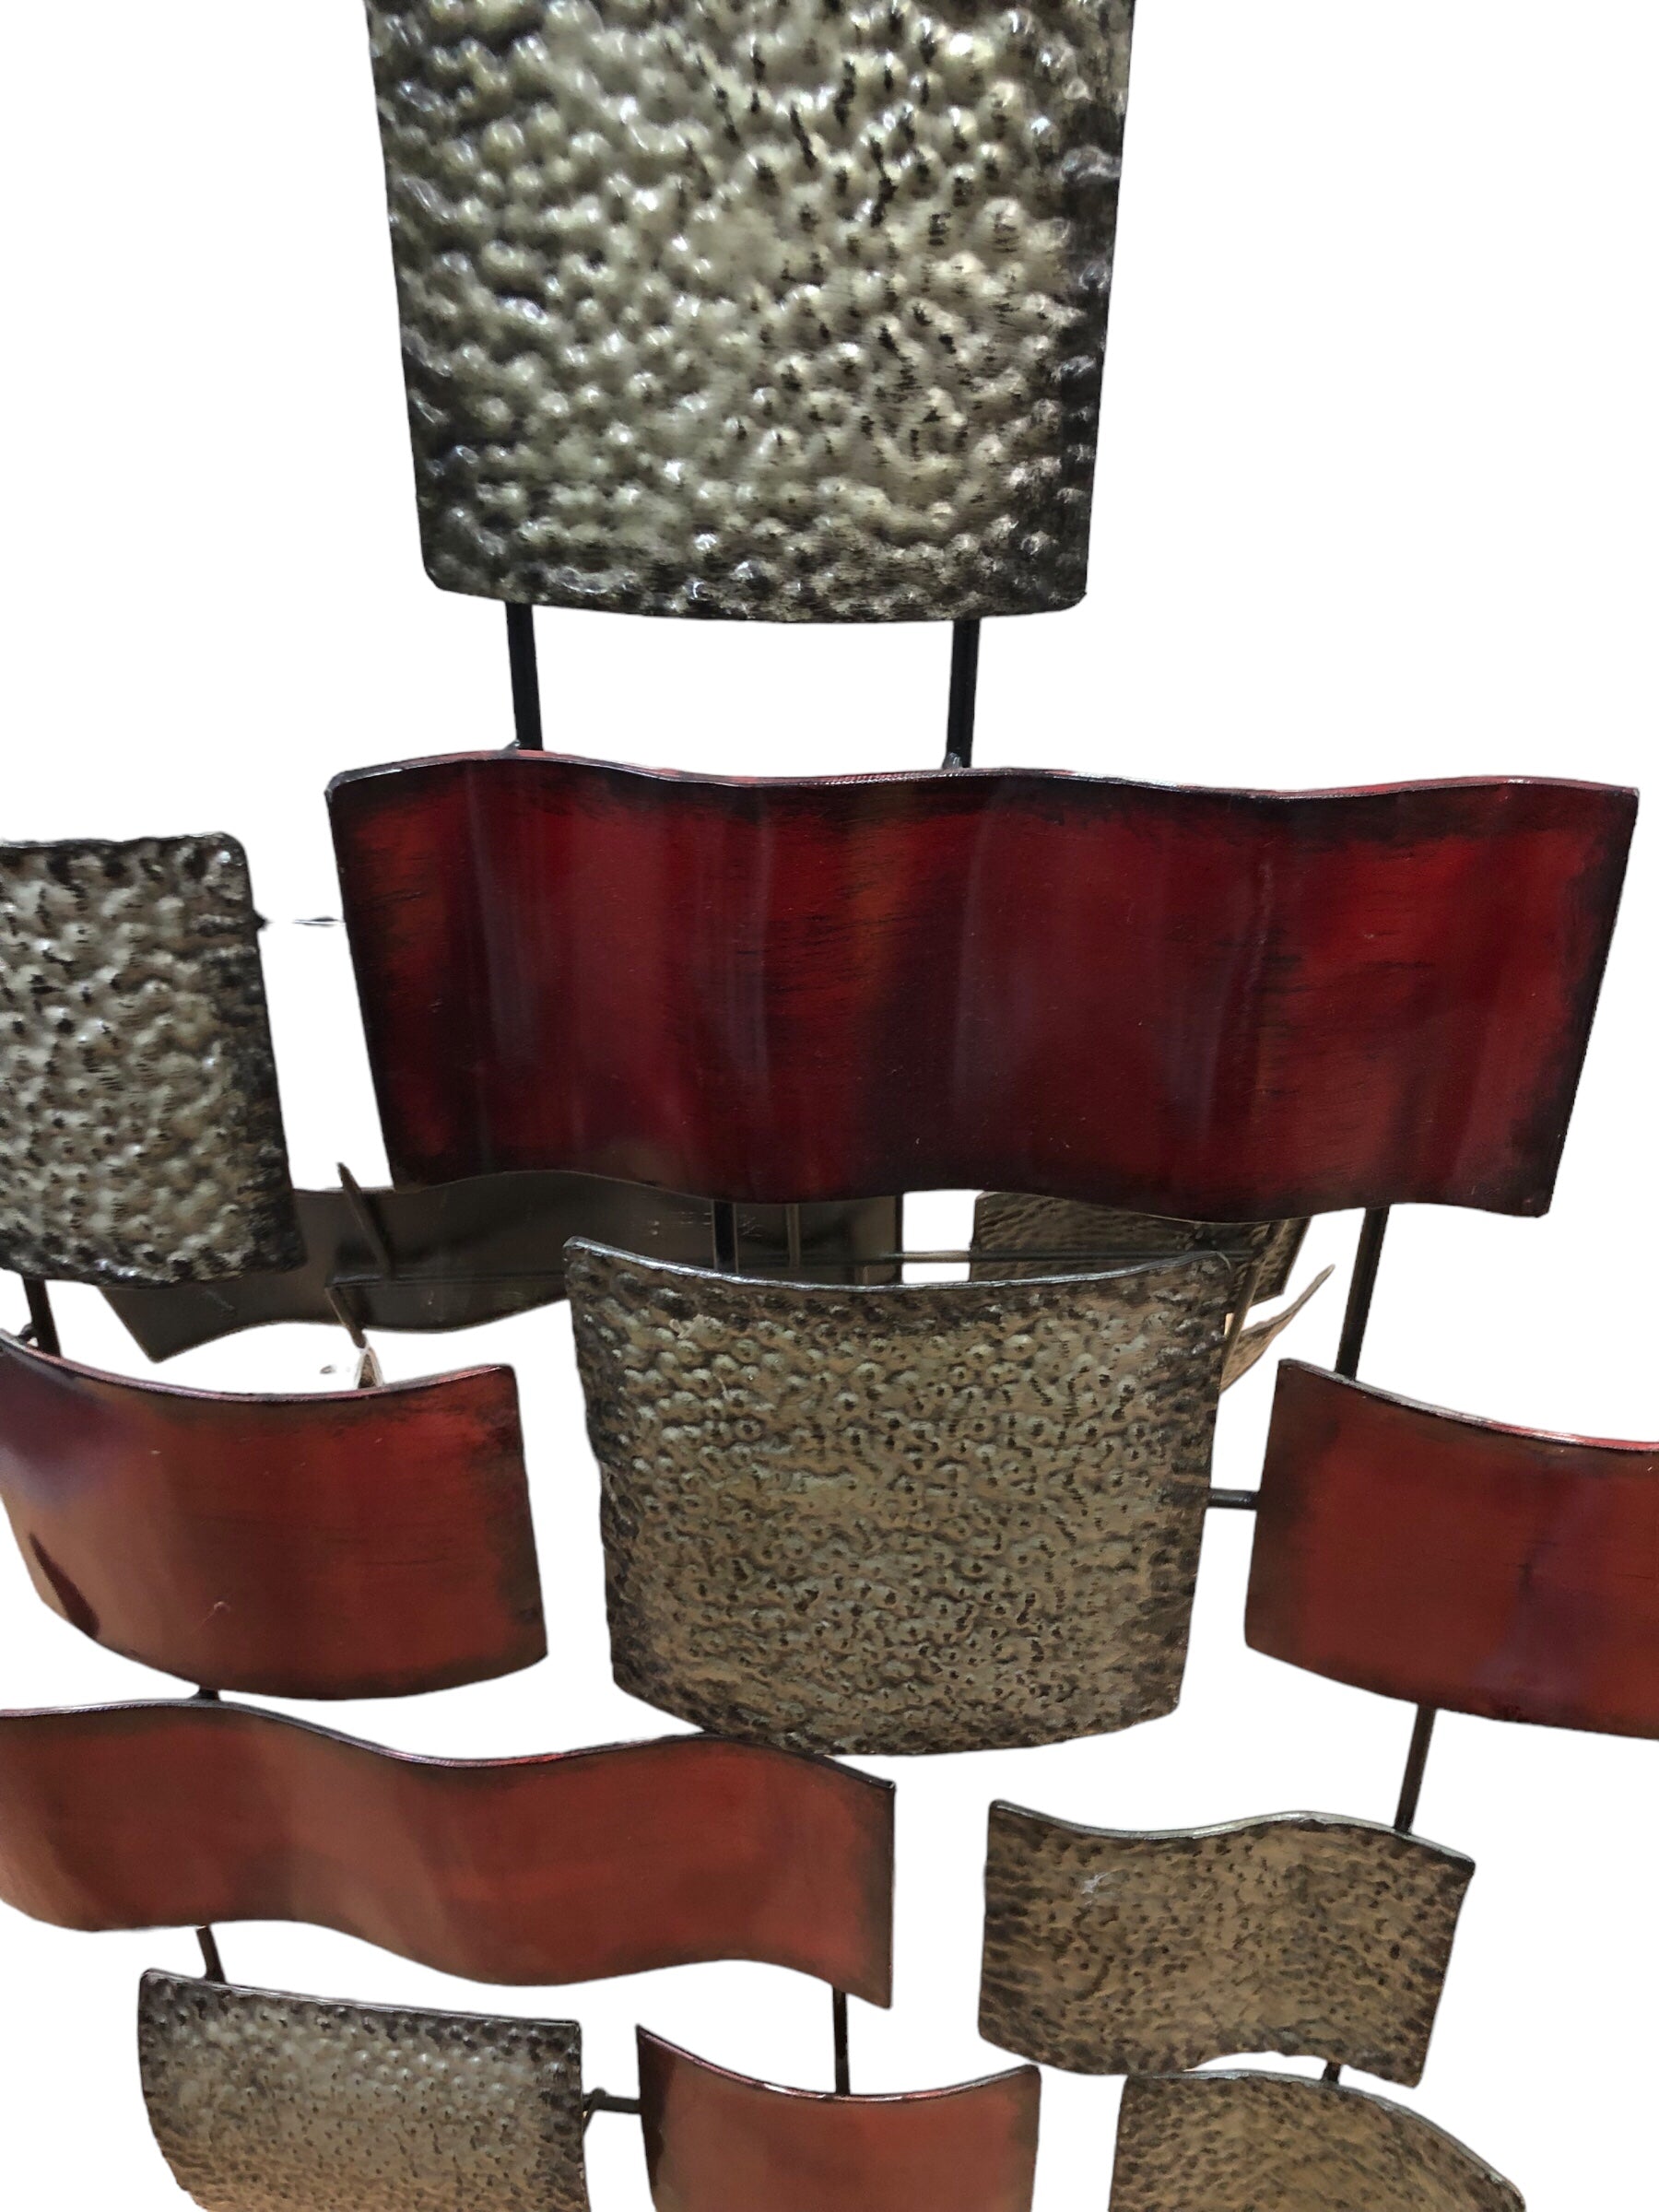 Red and Hammered Metal Wall Decor